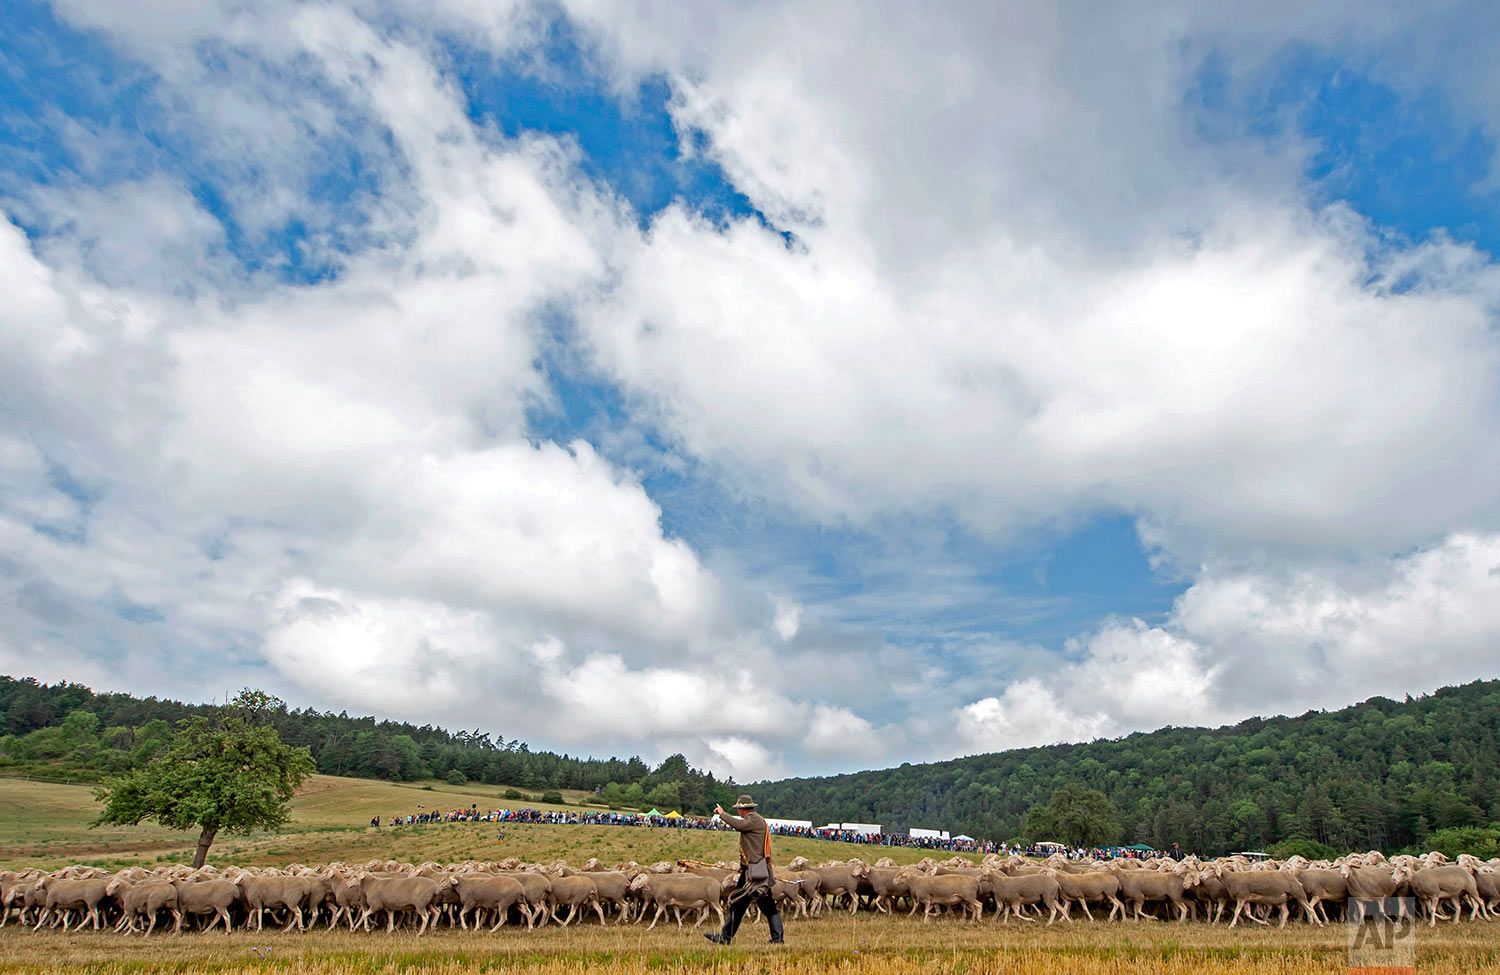  Andre Schwendel leads a herd of sheep during the Shepherds Championships of the German state Thuringia in Hohenfelden in Hohenfelden, central Germany, Saturday, Aug. 3, 2019. Shepherds lead a herd of 300 sheep together with two sheepdogs during the 